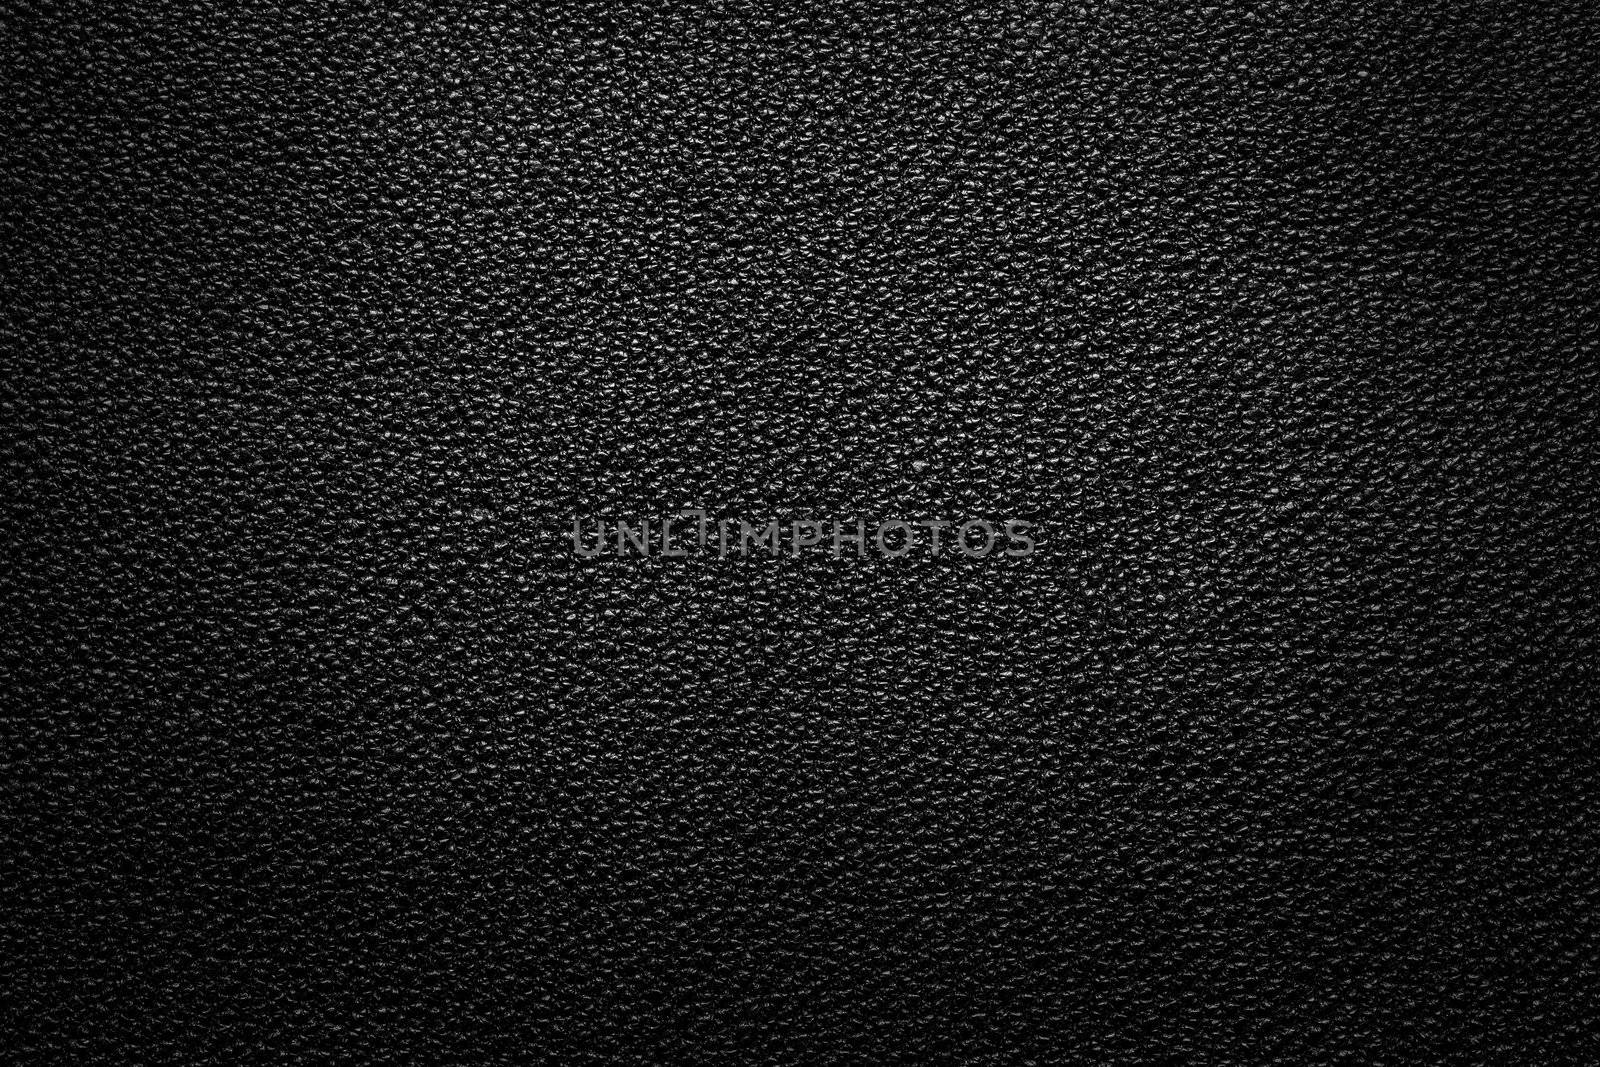 Black leather texture for background with light from above
